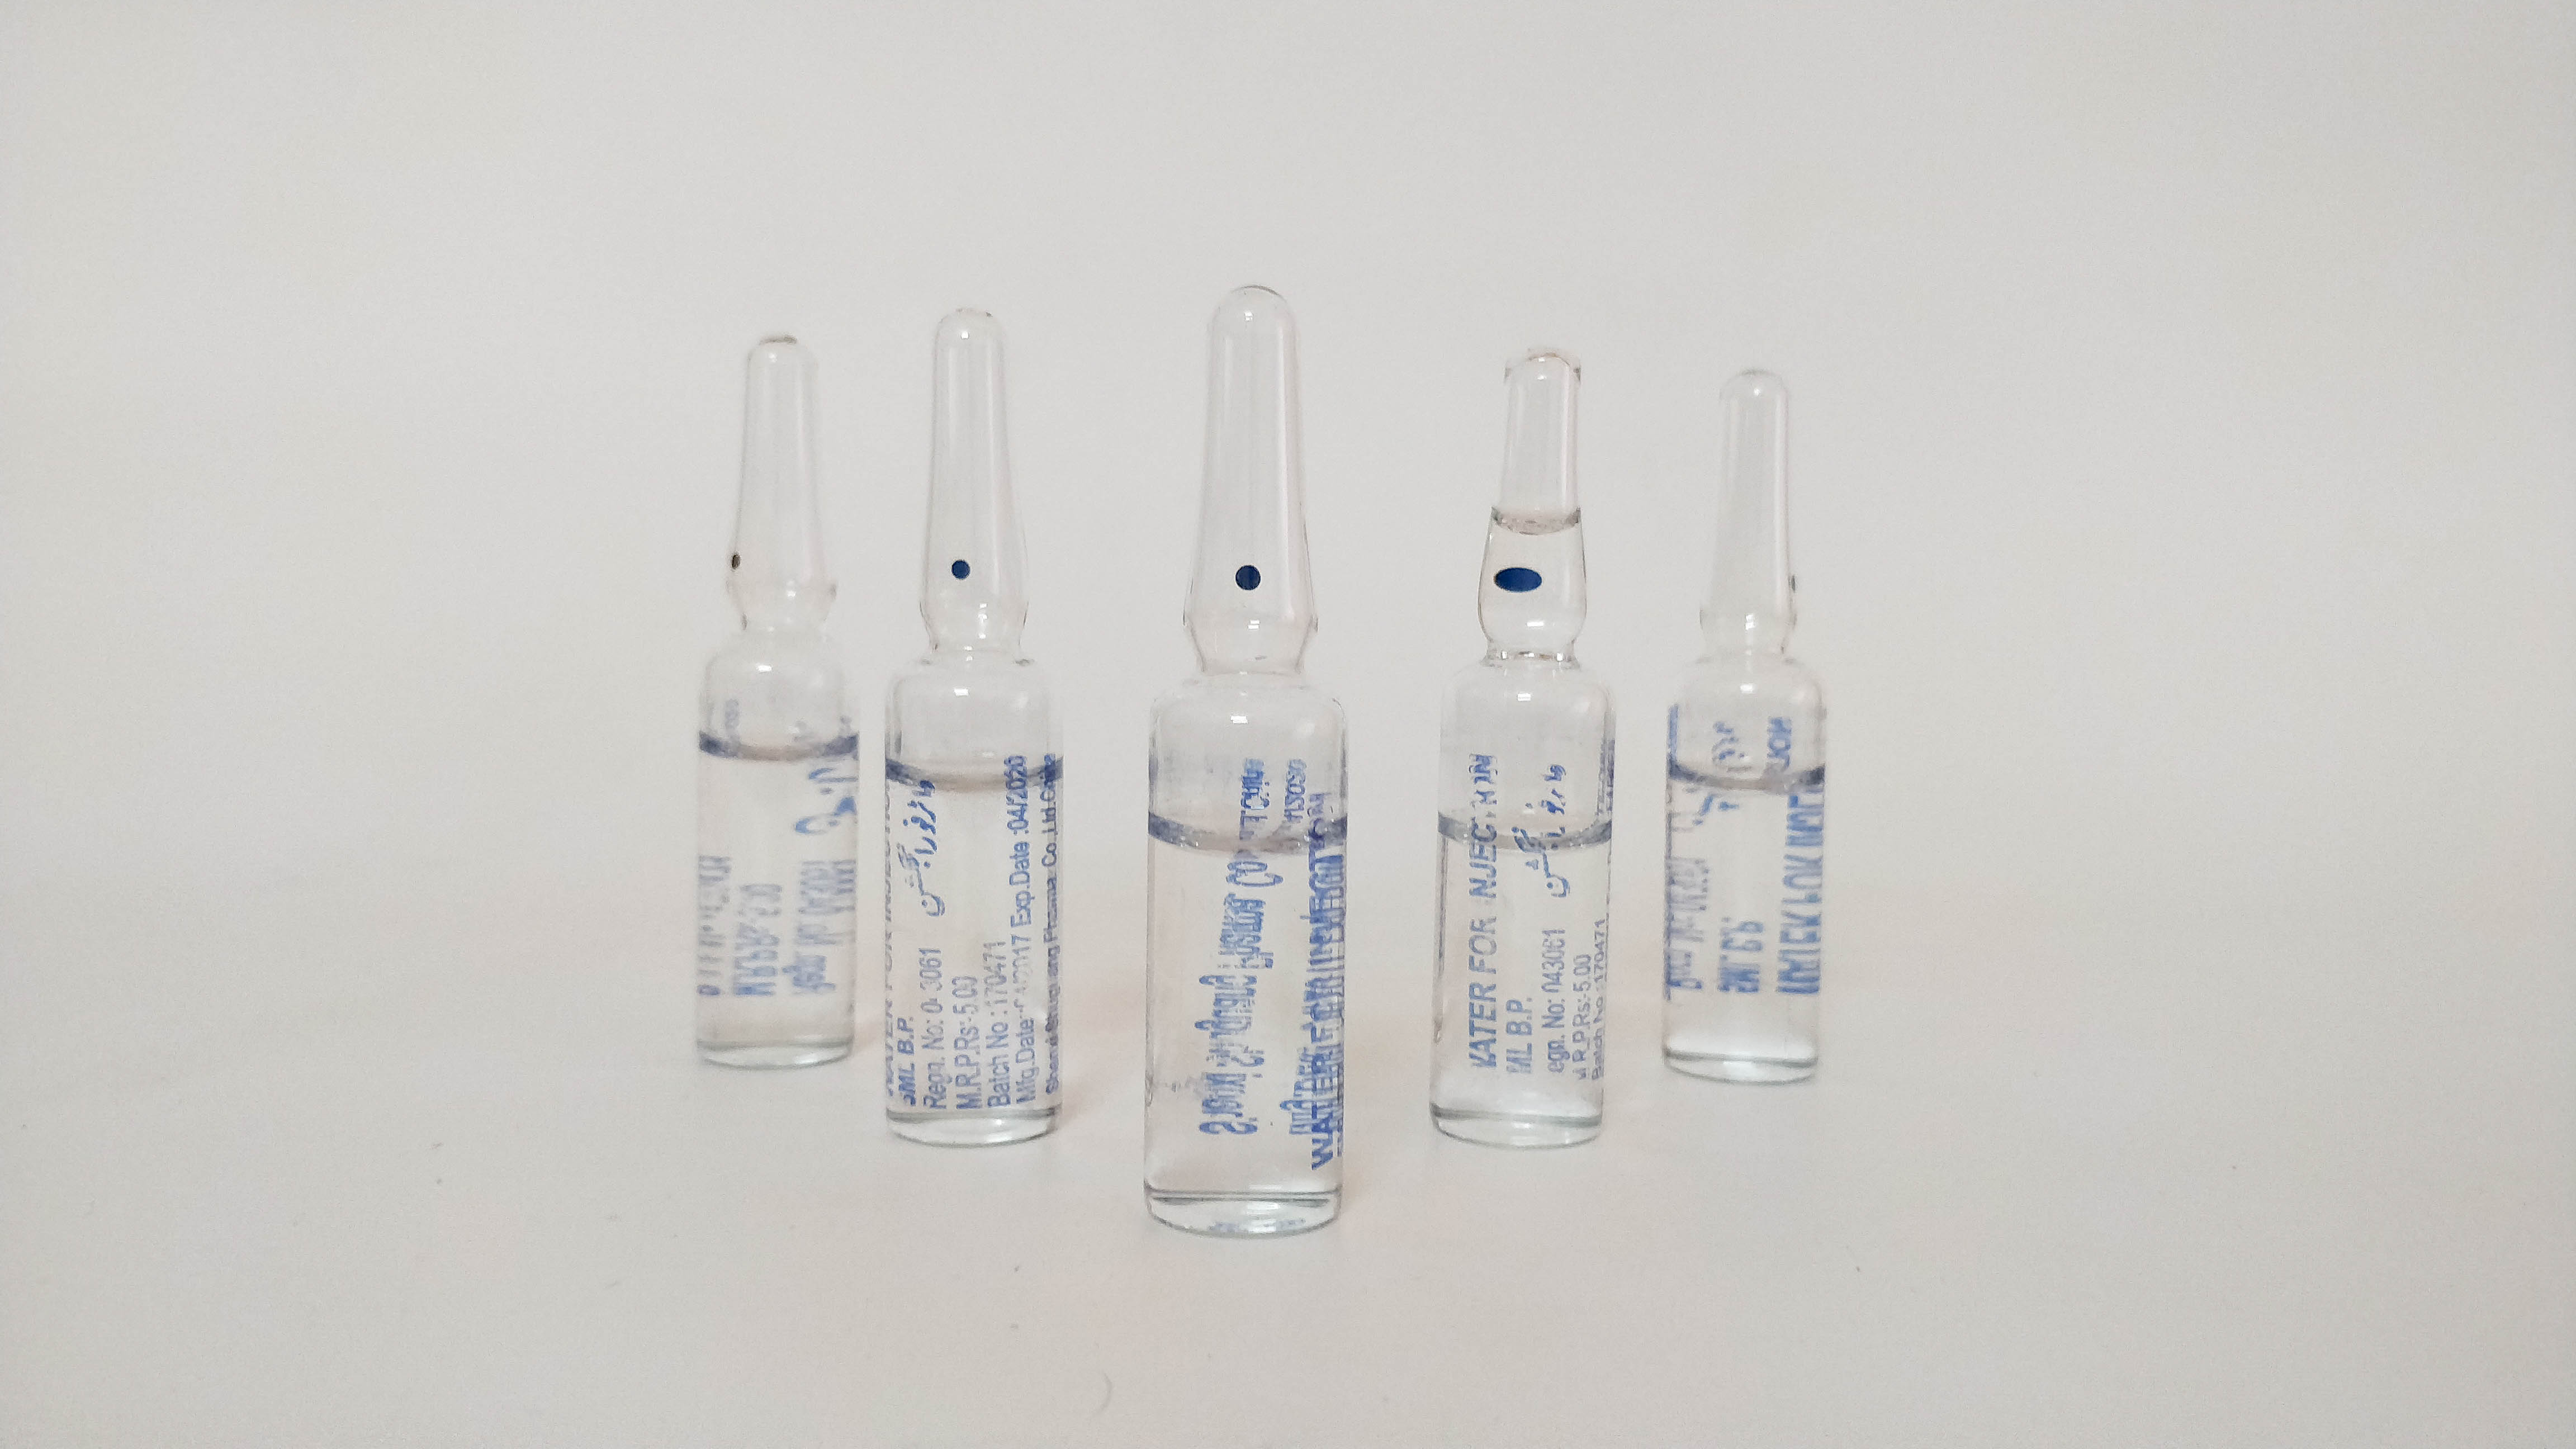 Water for Injection 5ml